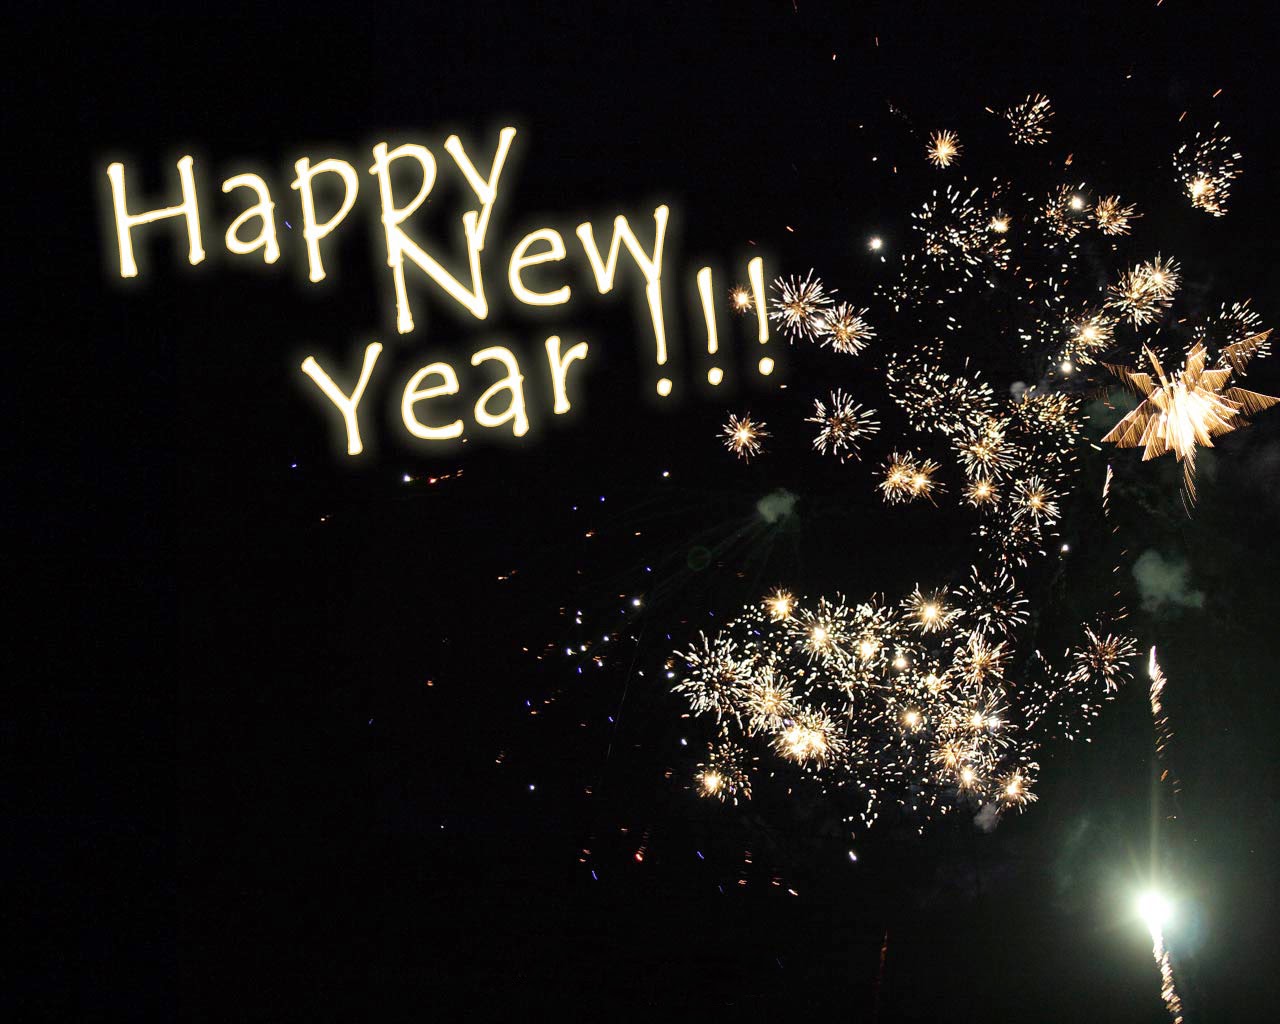 Happy New Year Wallpaper Image Phoptos Pics Pictures